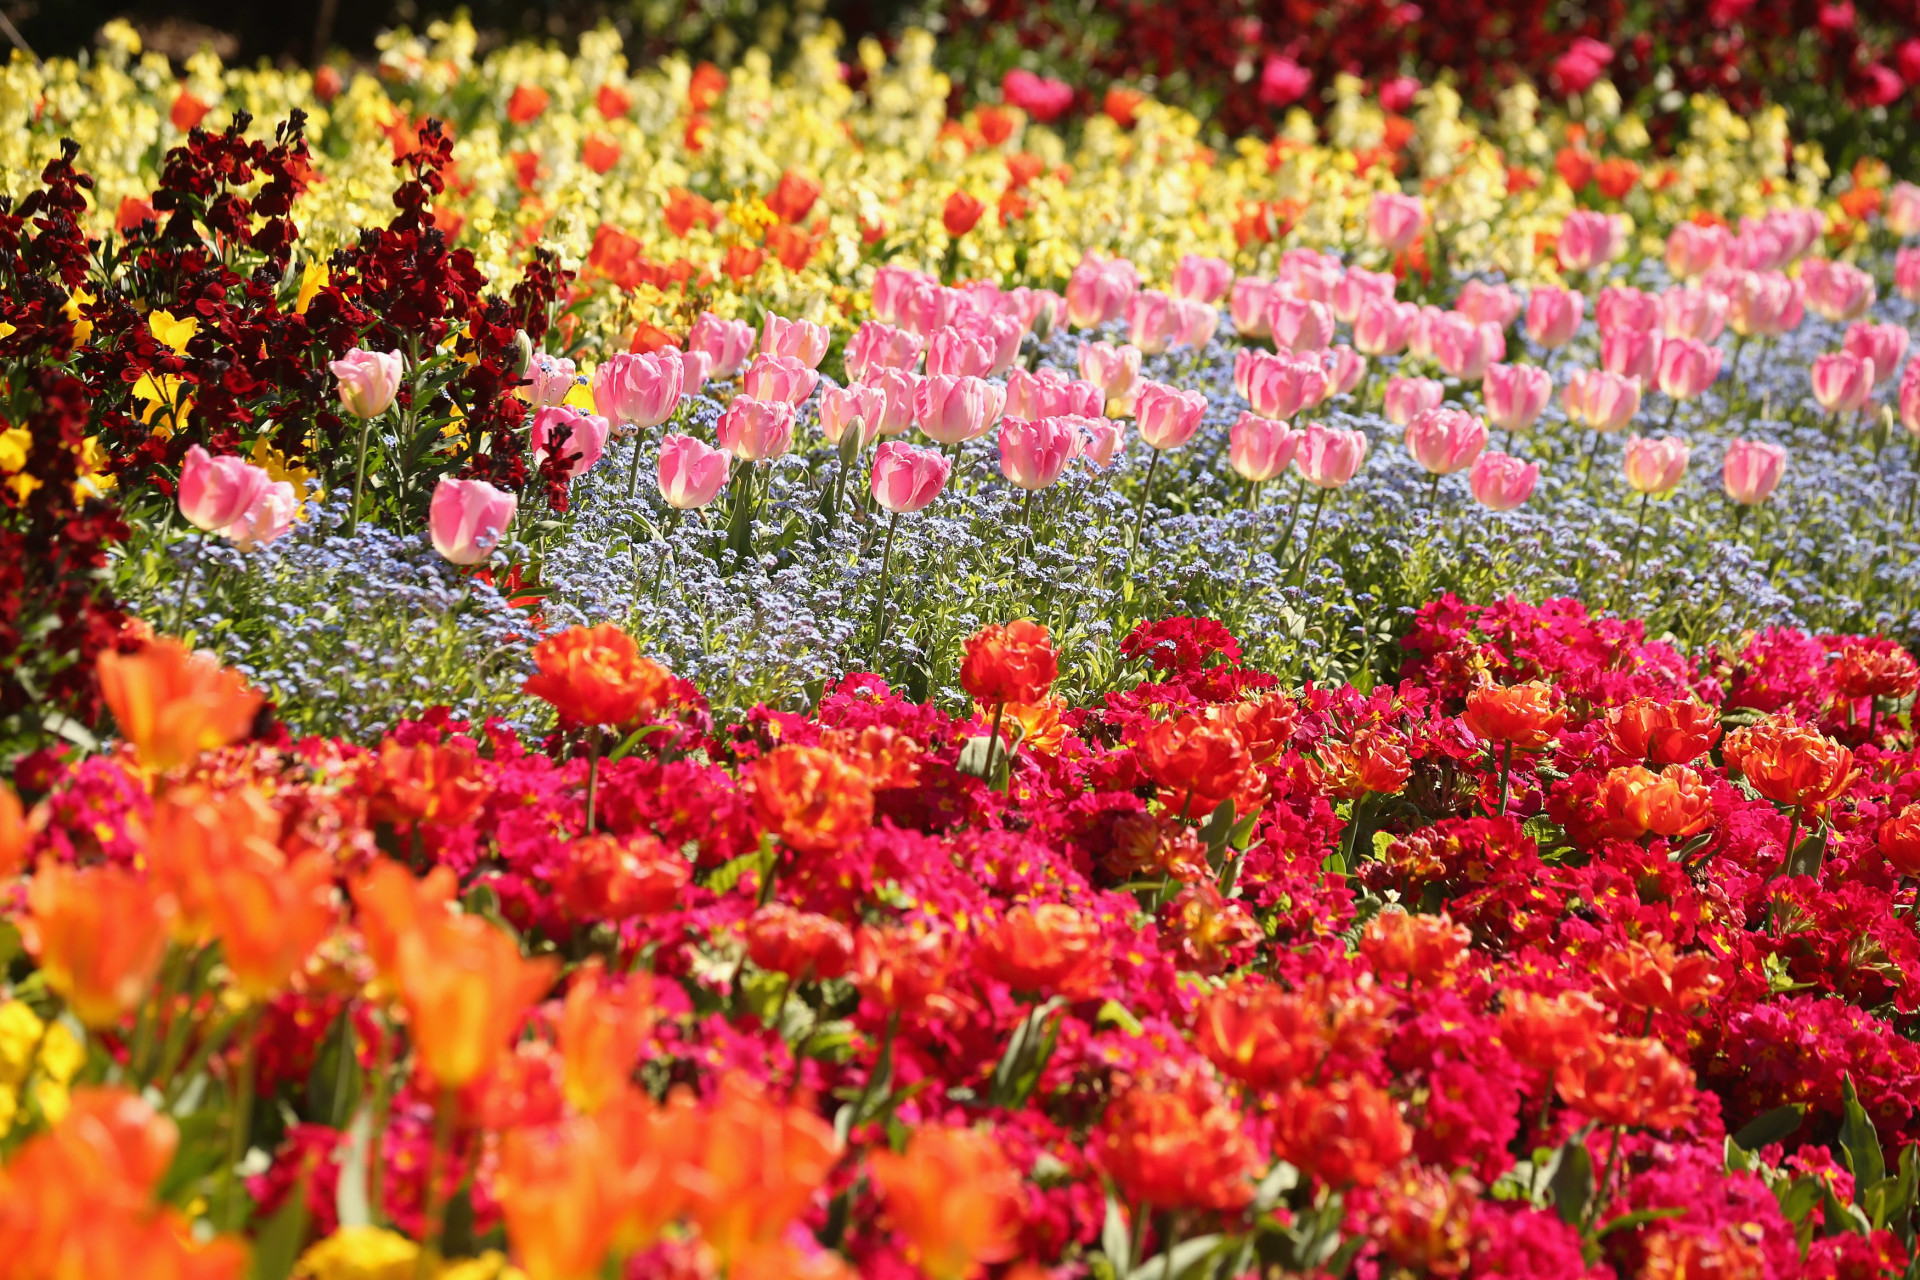 Tulips in full bloom in St James' Park as temperatures begin to rise across the UK. <p>You may also like:<a href="https://www.starsinsider.com/n/346898?utm_source=msn.com&utm_medium=display&utm_campaign=referral_description&utm_content=344596v2en-us"> The world's most extravagant sports stadiums</a></p>